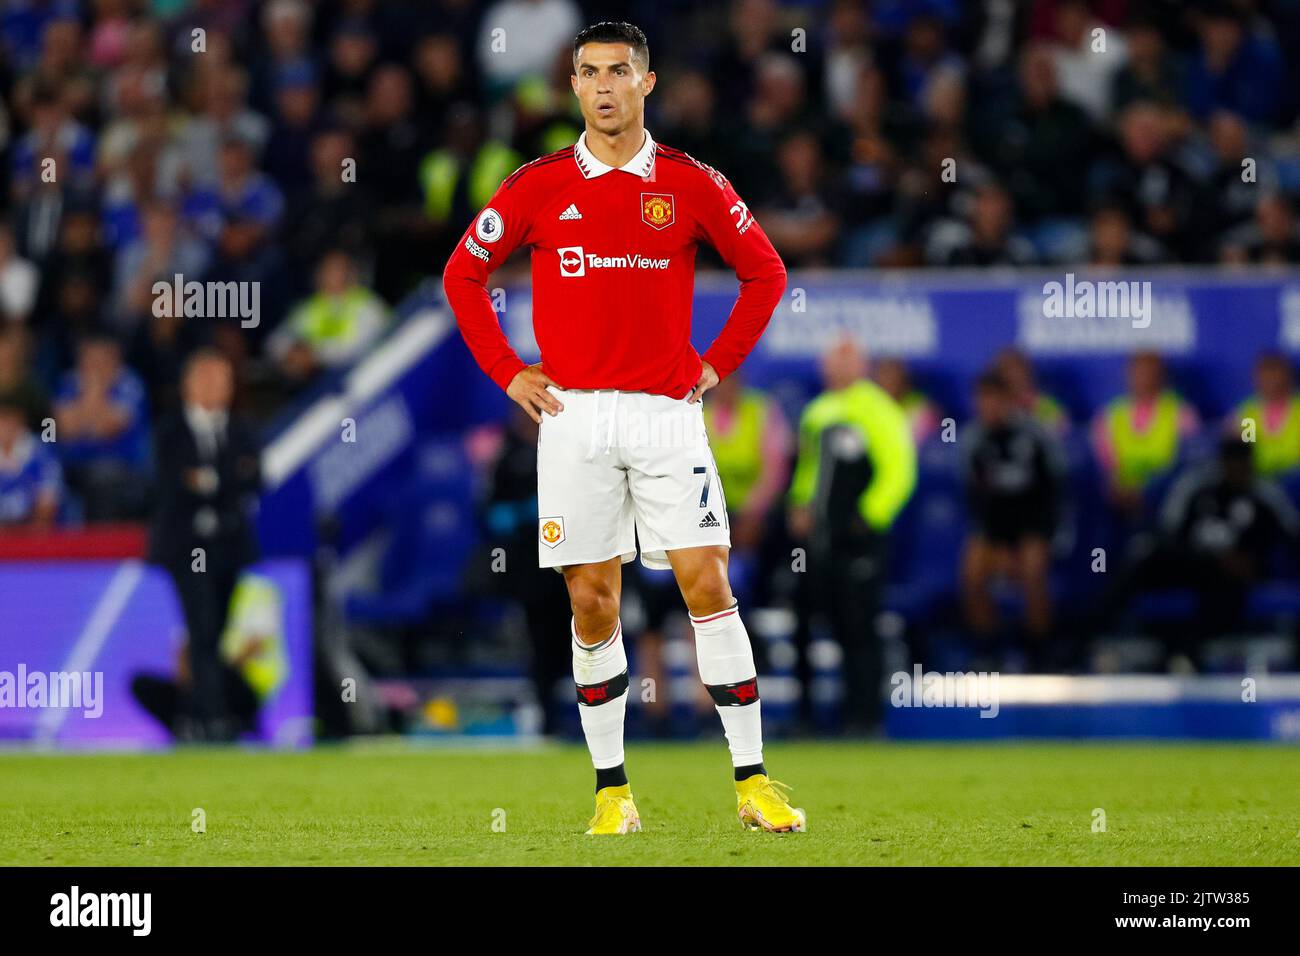 1st September 2022; The King Power Stadium, Leicester, Leicestershire, England;  Premier League Football, Leicester City versus Manchester United; Cristiano Ronaldo of Manchester United Stock Photo